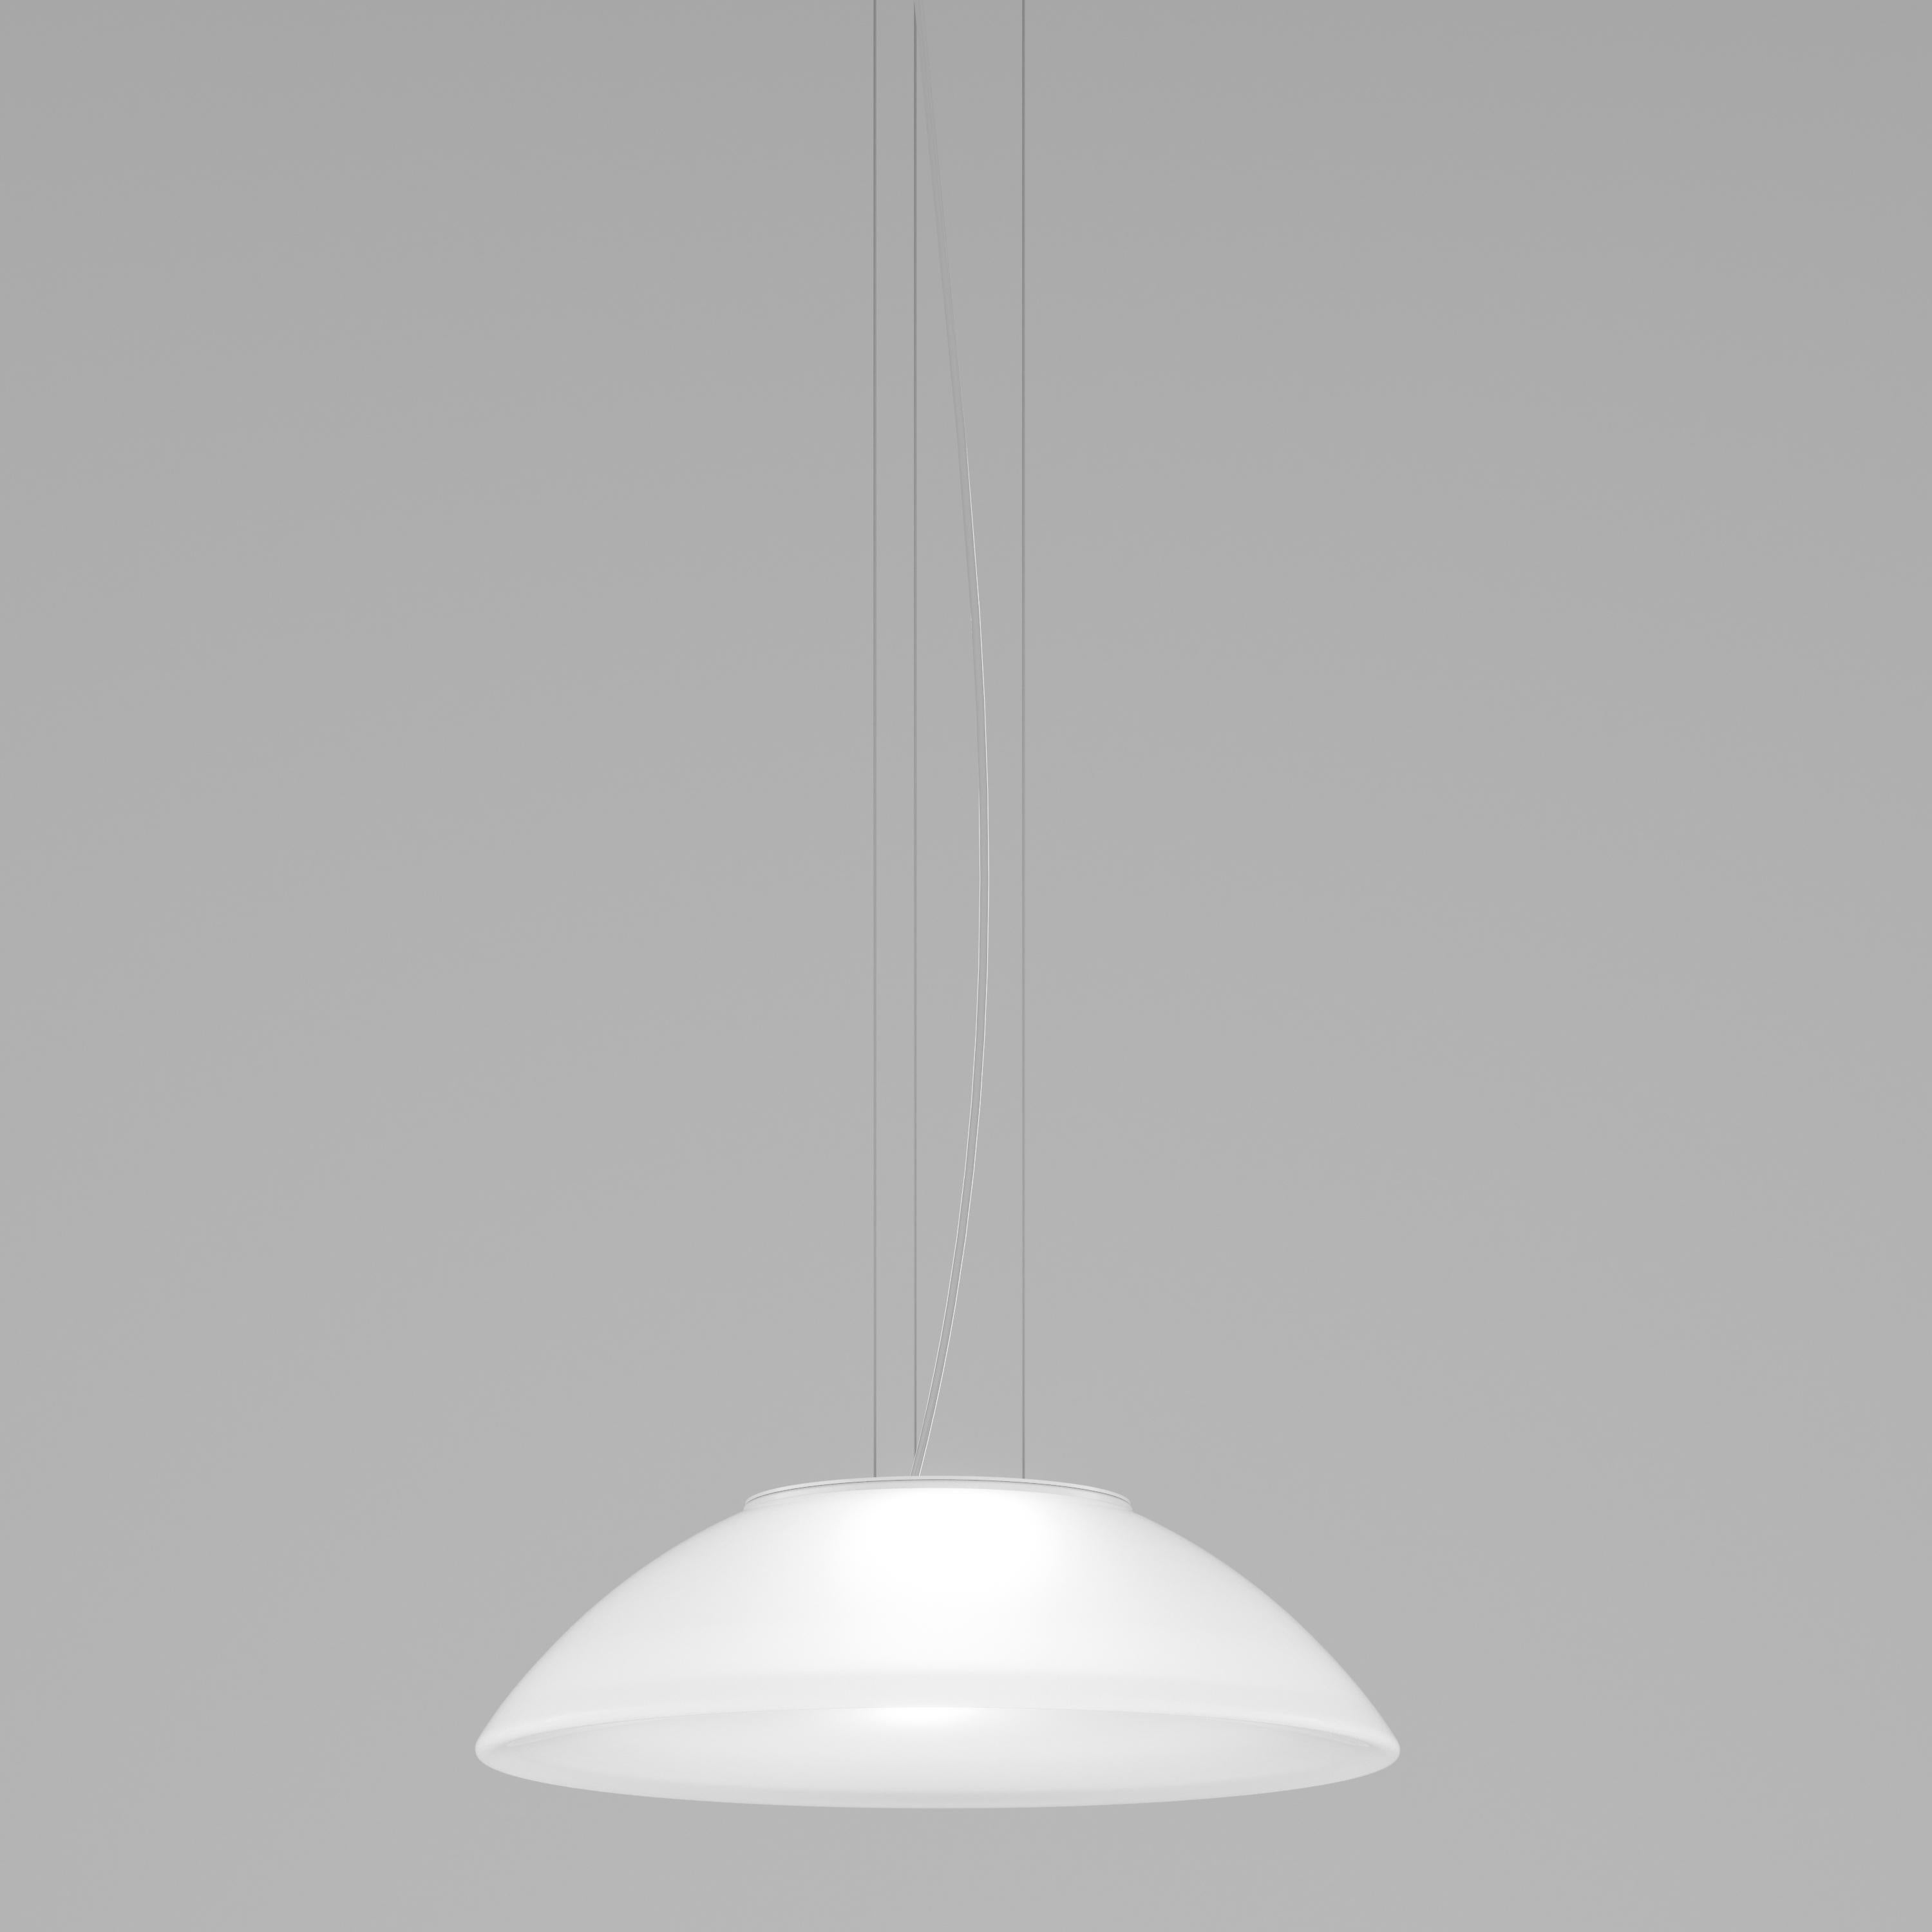 Available as pendant, ceiling or wall lamp. It is the perfect answer for those looking for a large lamp. The diffuser, especially in the bigger size, offers a large lighting surface area despite a minimalist metal